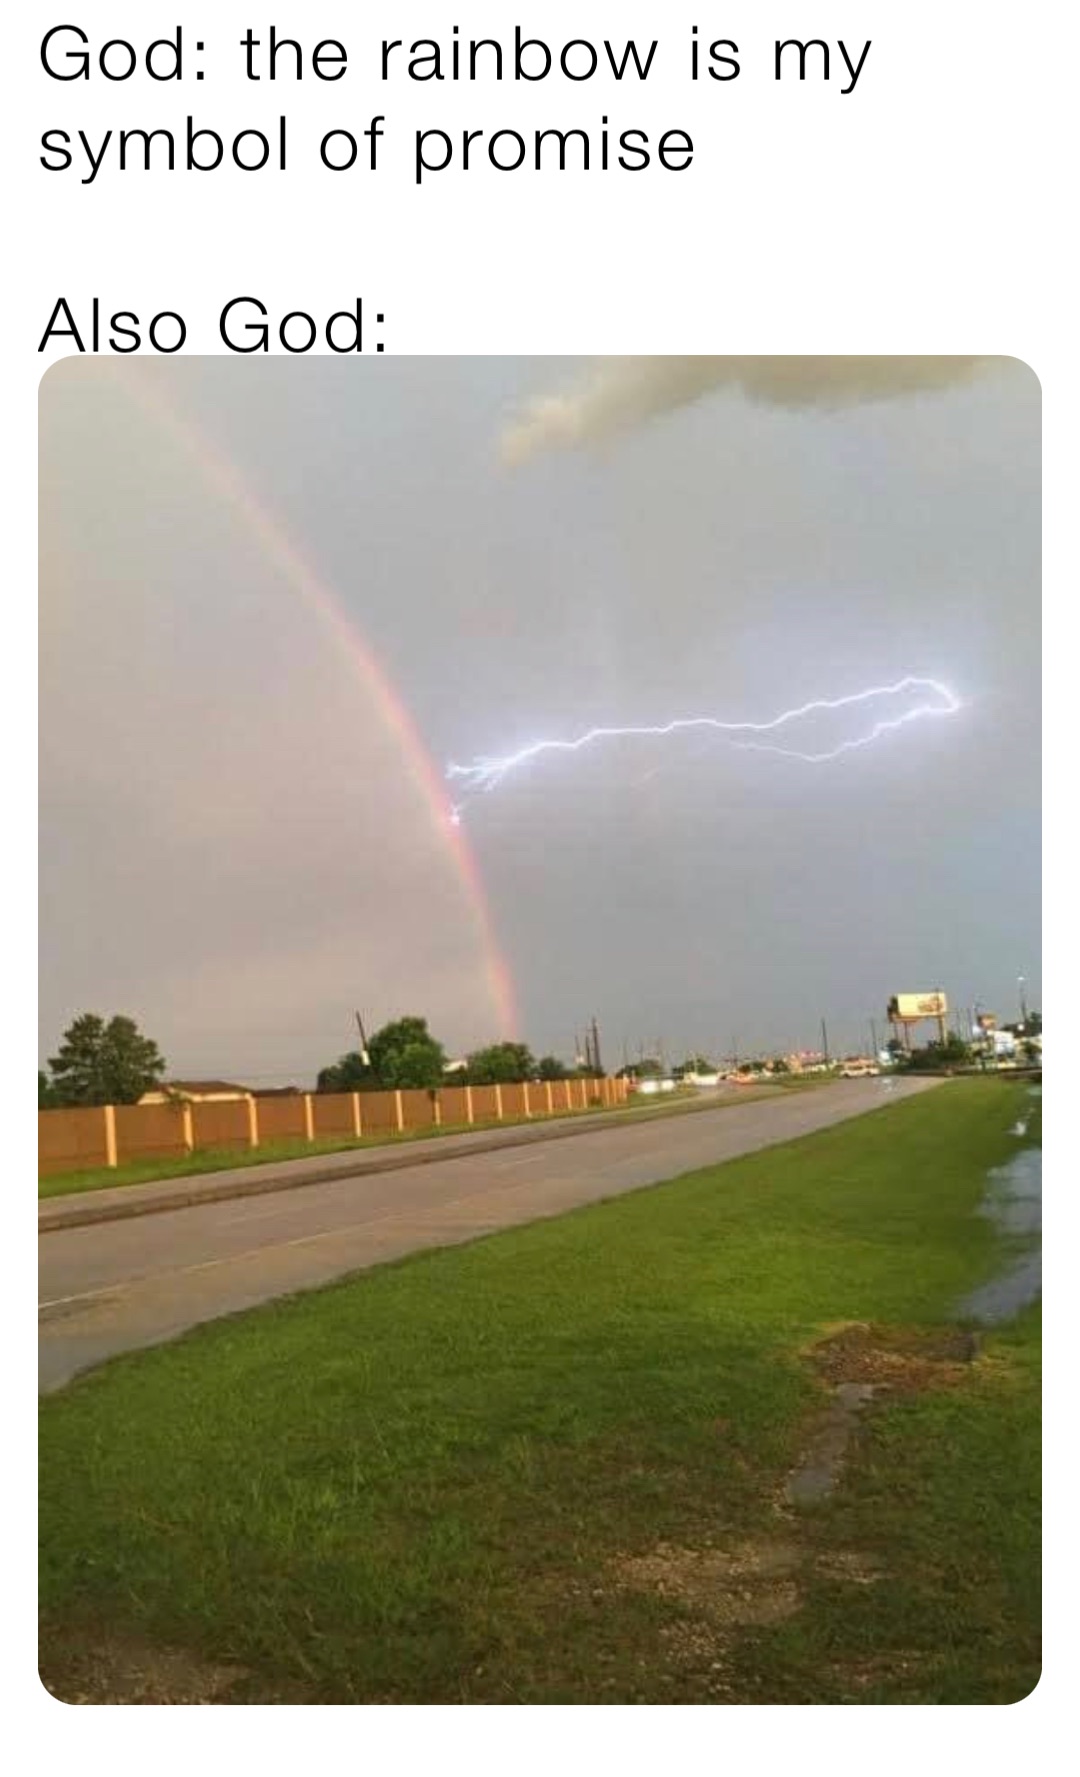 God: the rainbow is my symbol of promise

Also God: